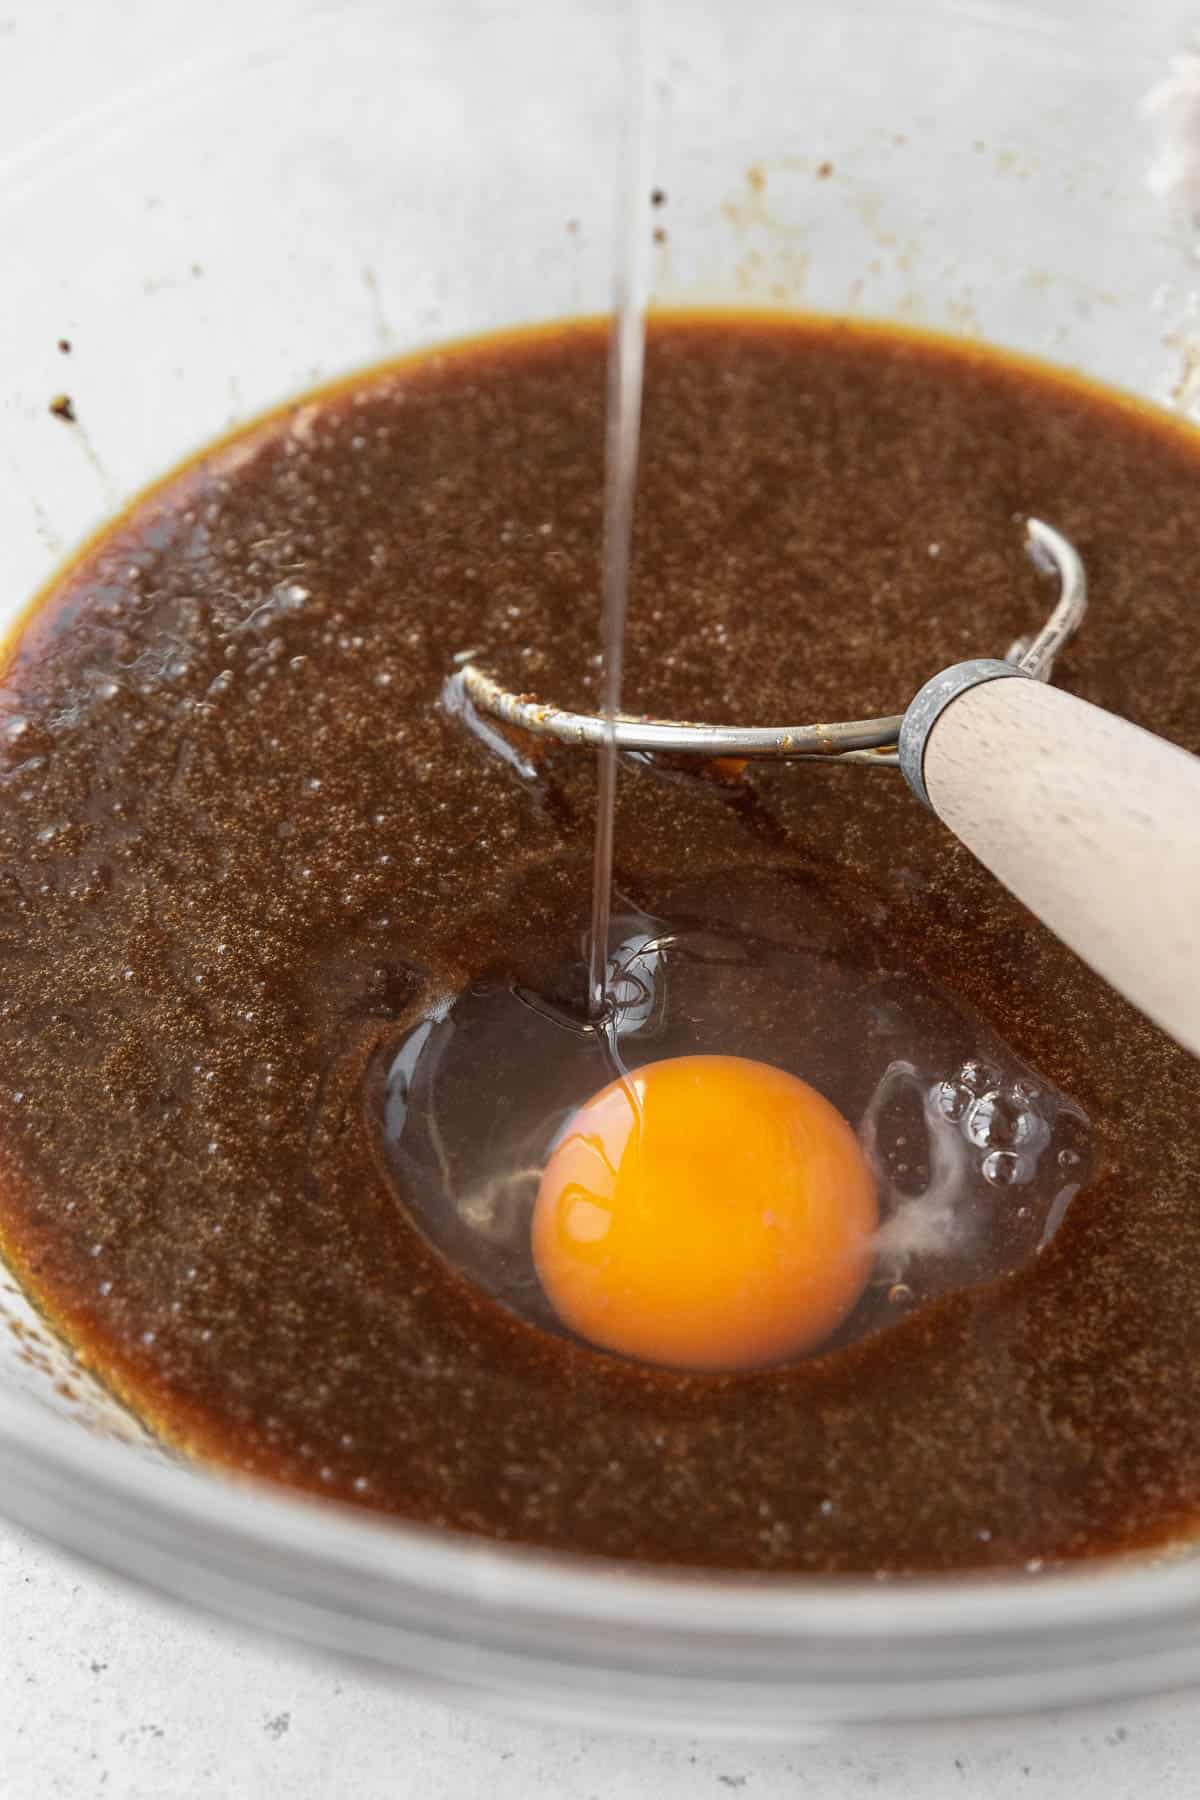 Adding an egg to the gluten-free whoopie pie batter.